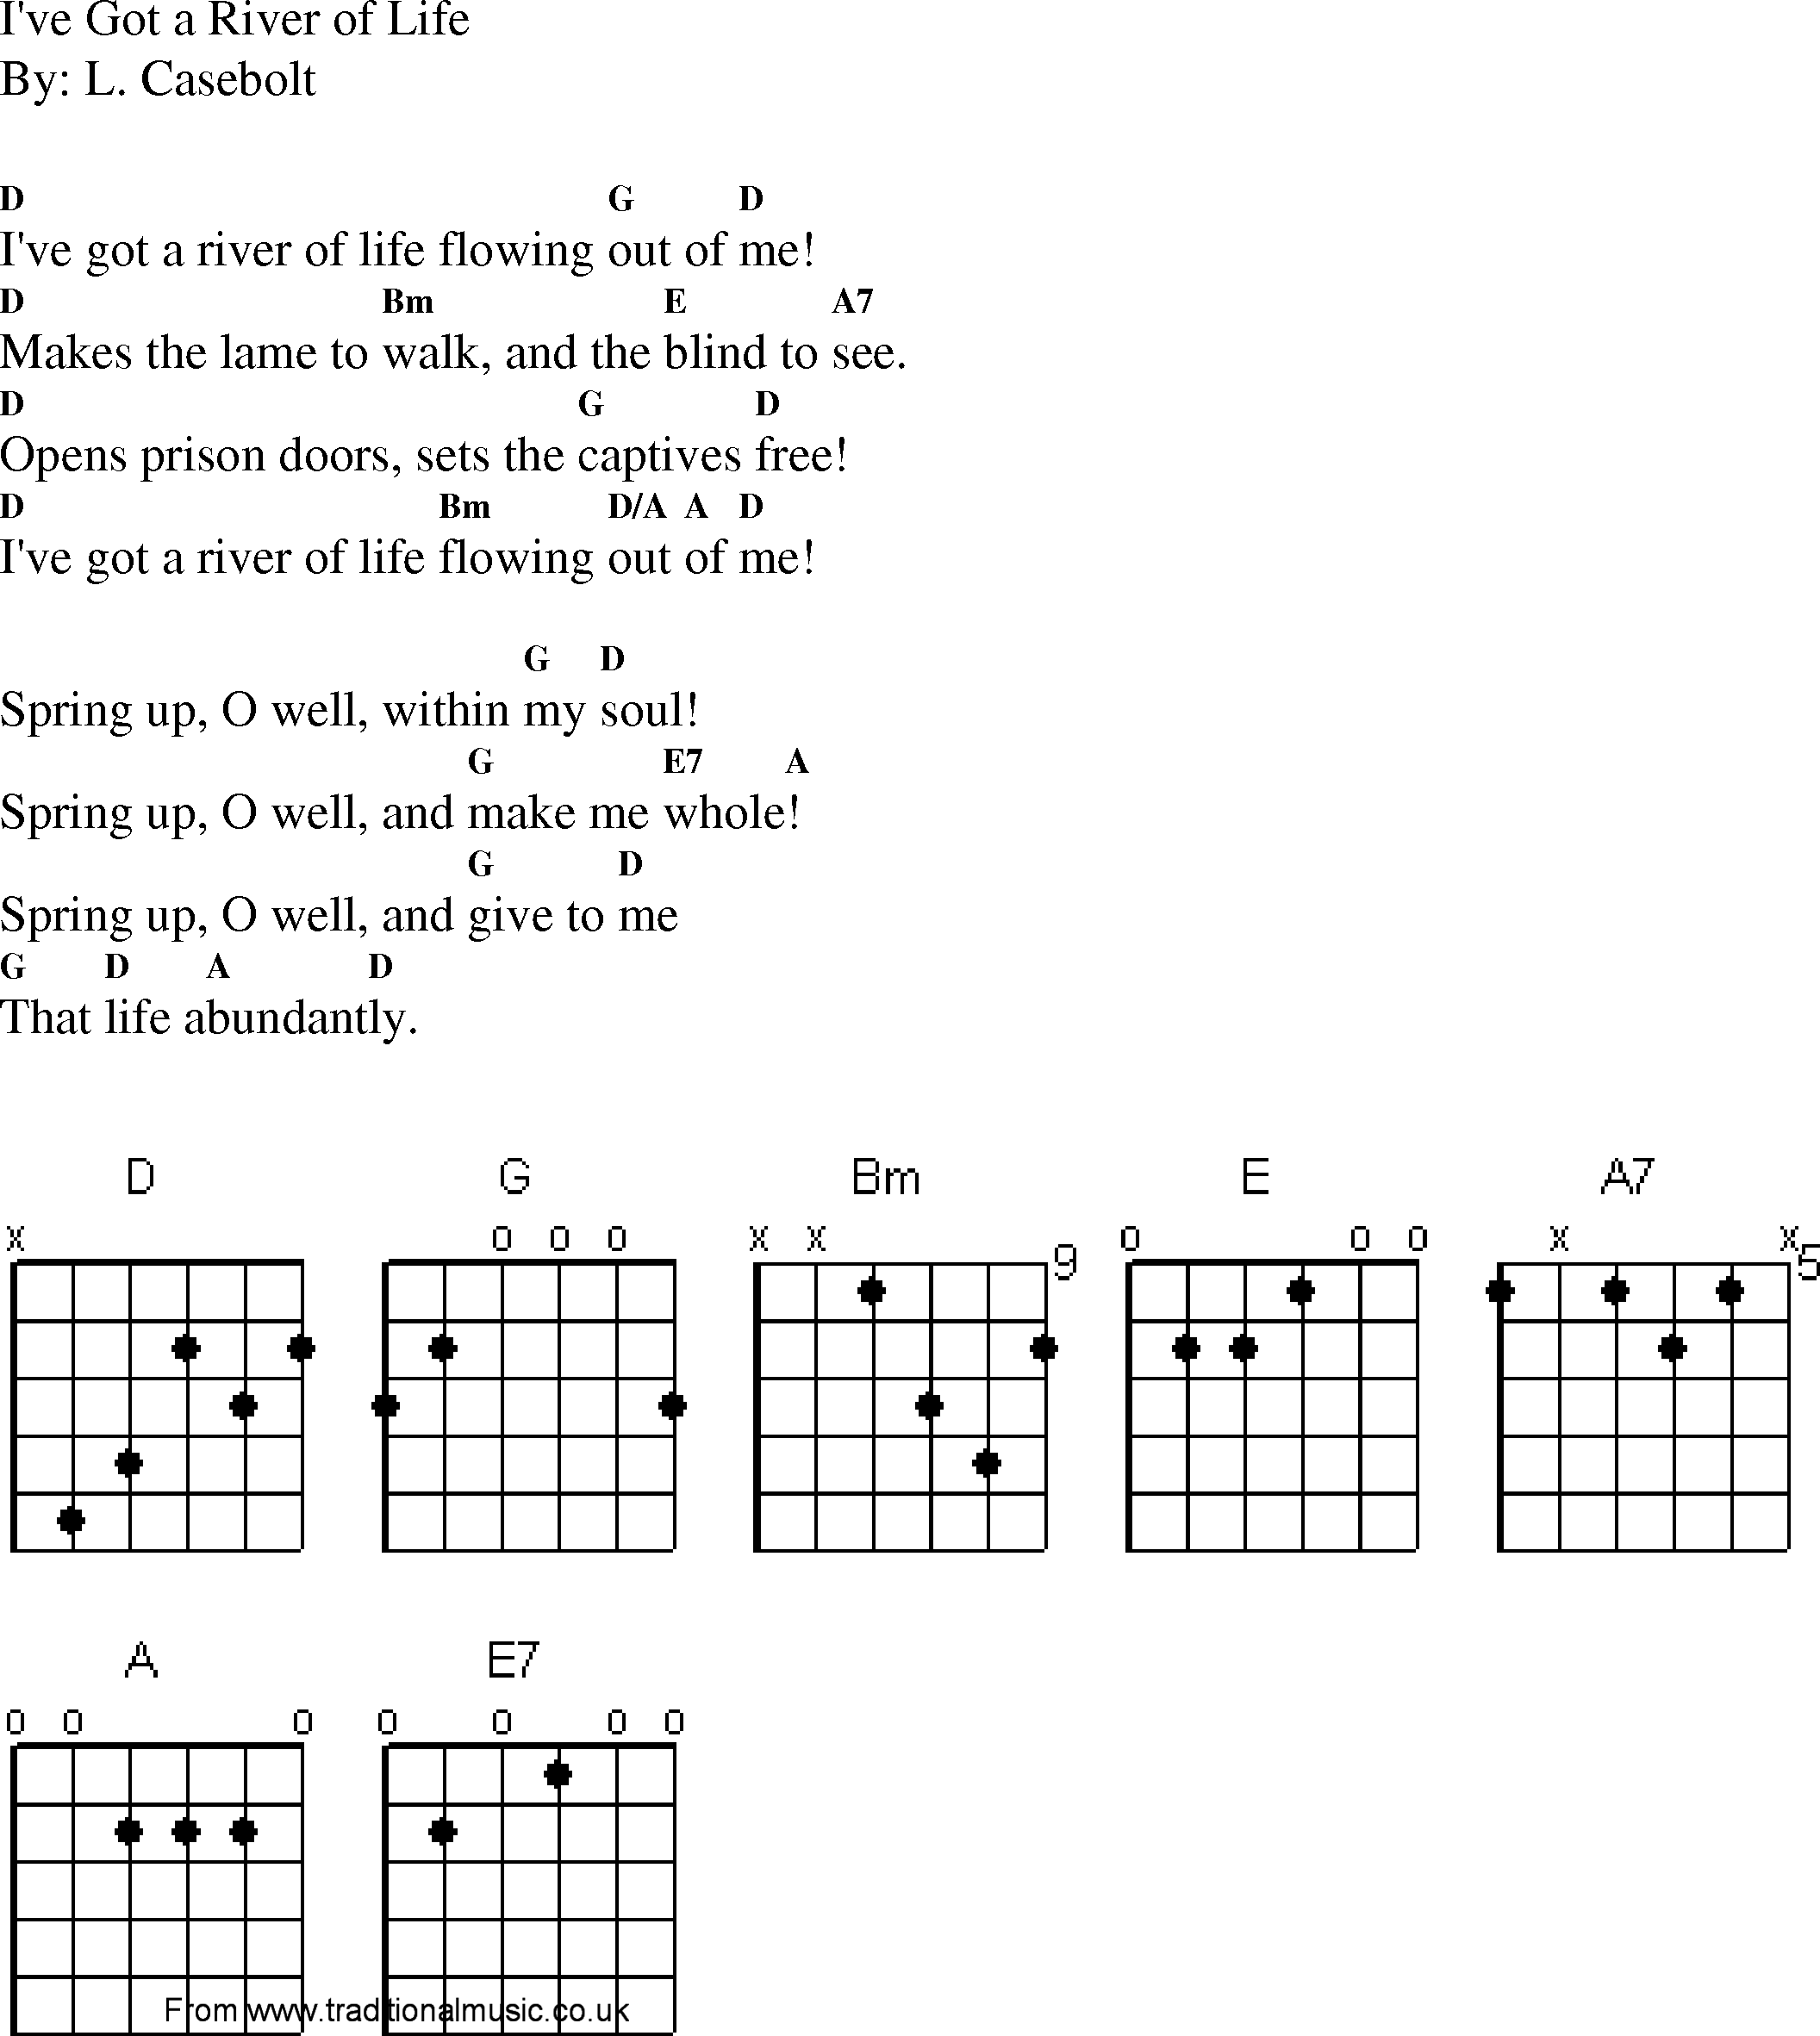 Gospel Song: ive_got_a_river_of_life, lyrics and chords.